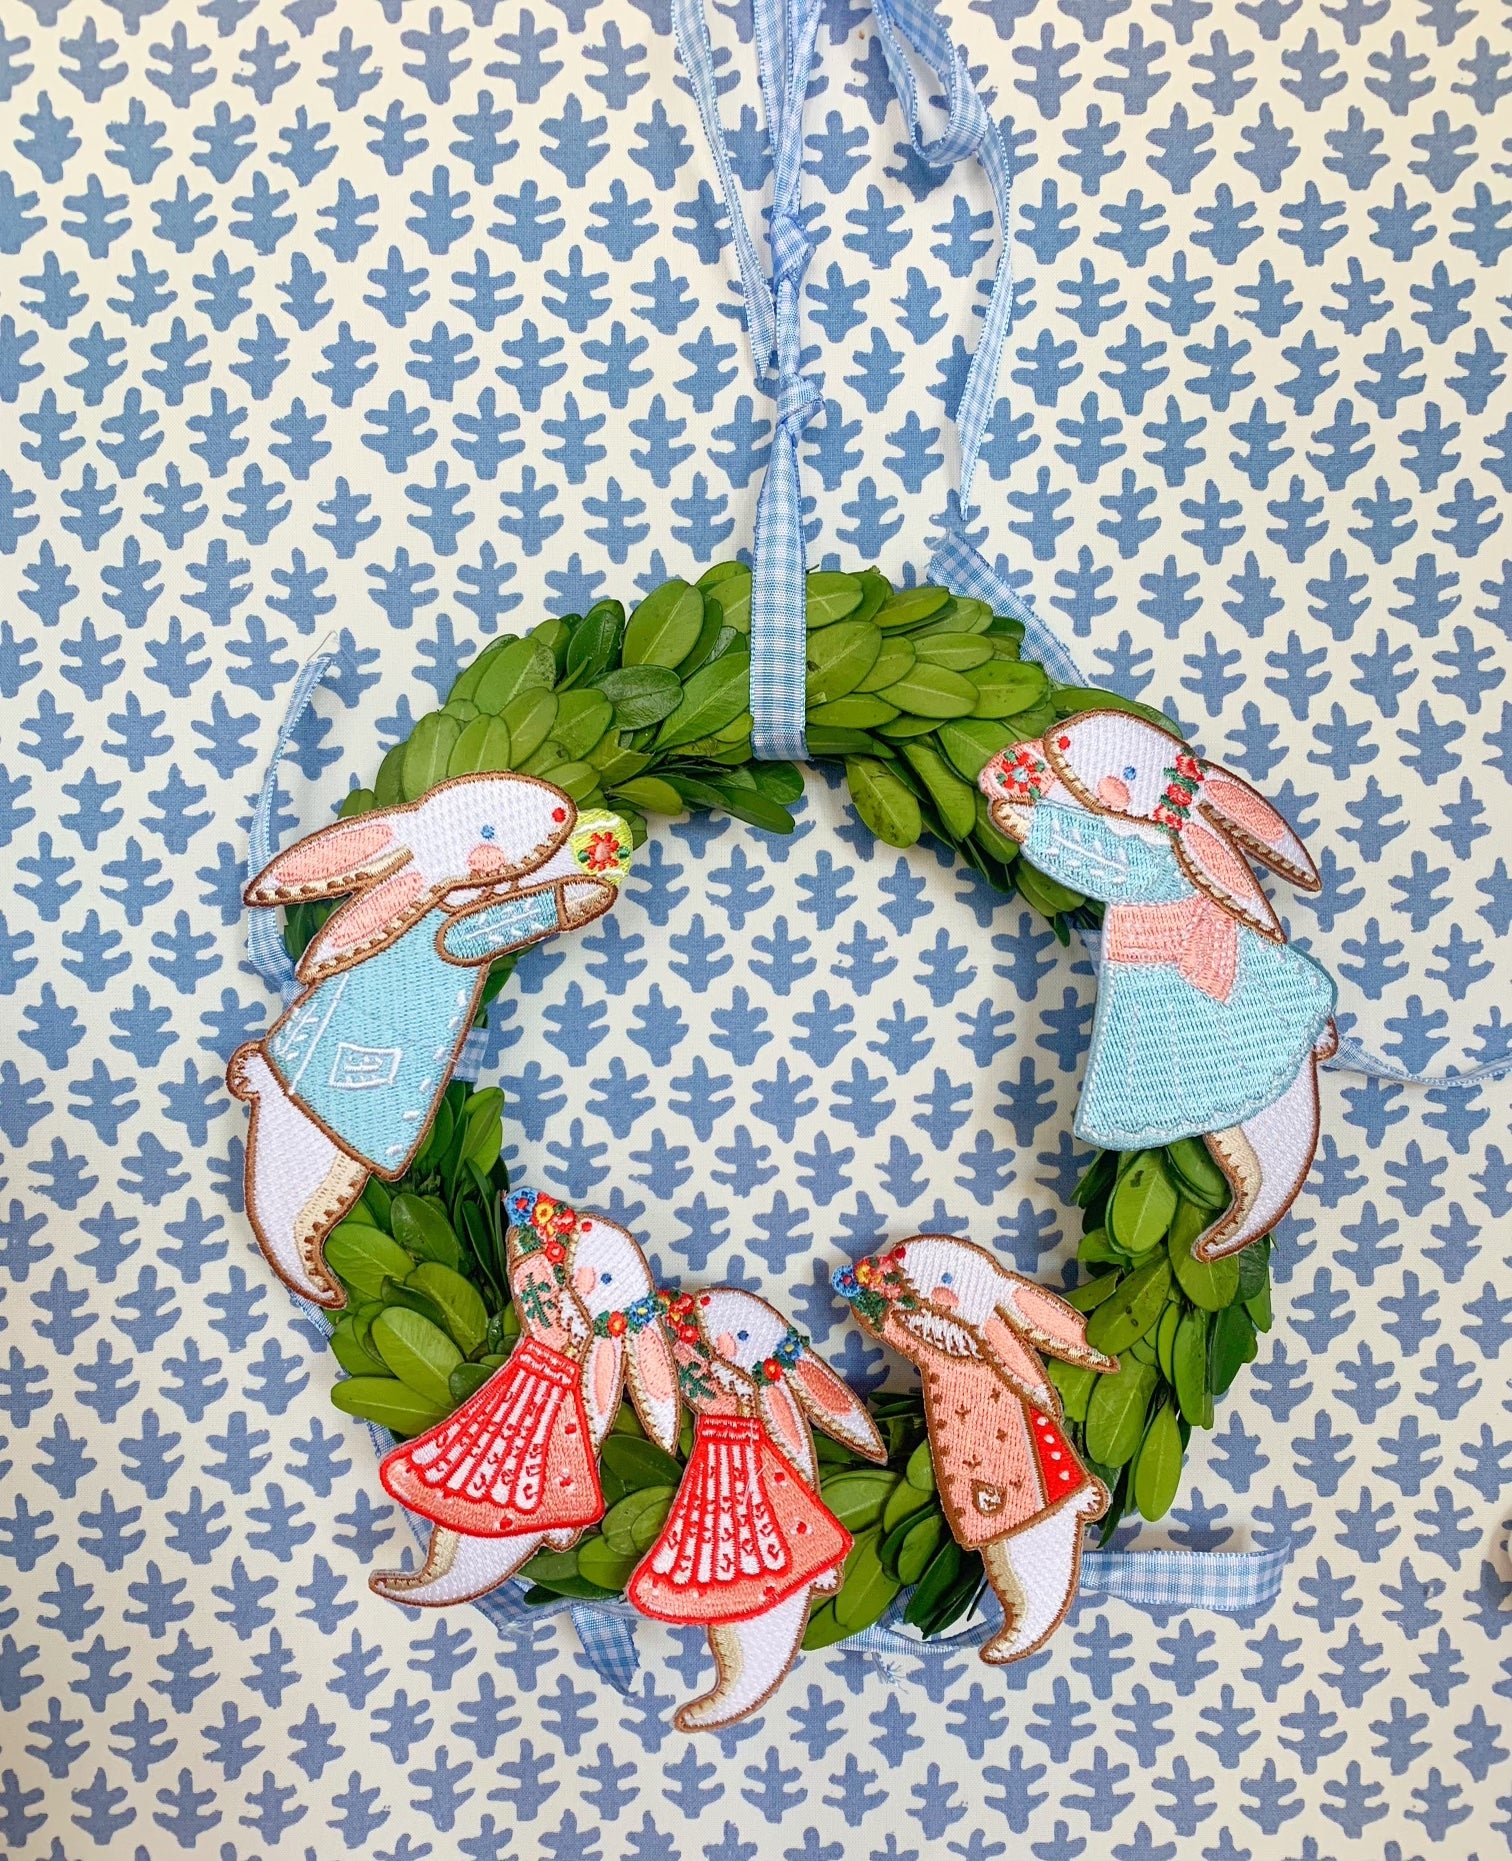 Embroidered Bunny Family Ornaments on Preserved Laurel Wreath